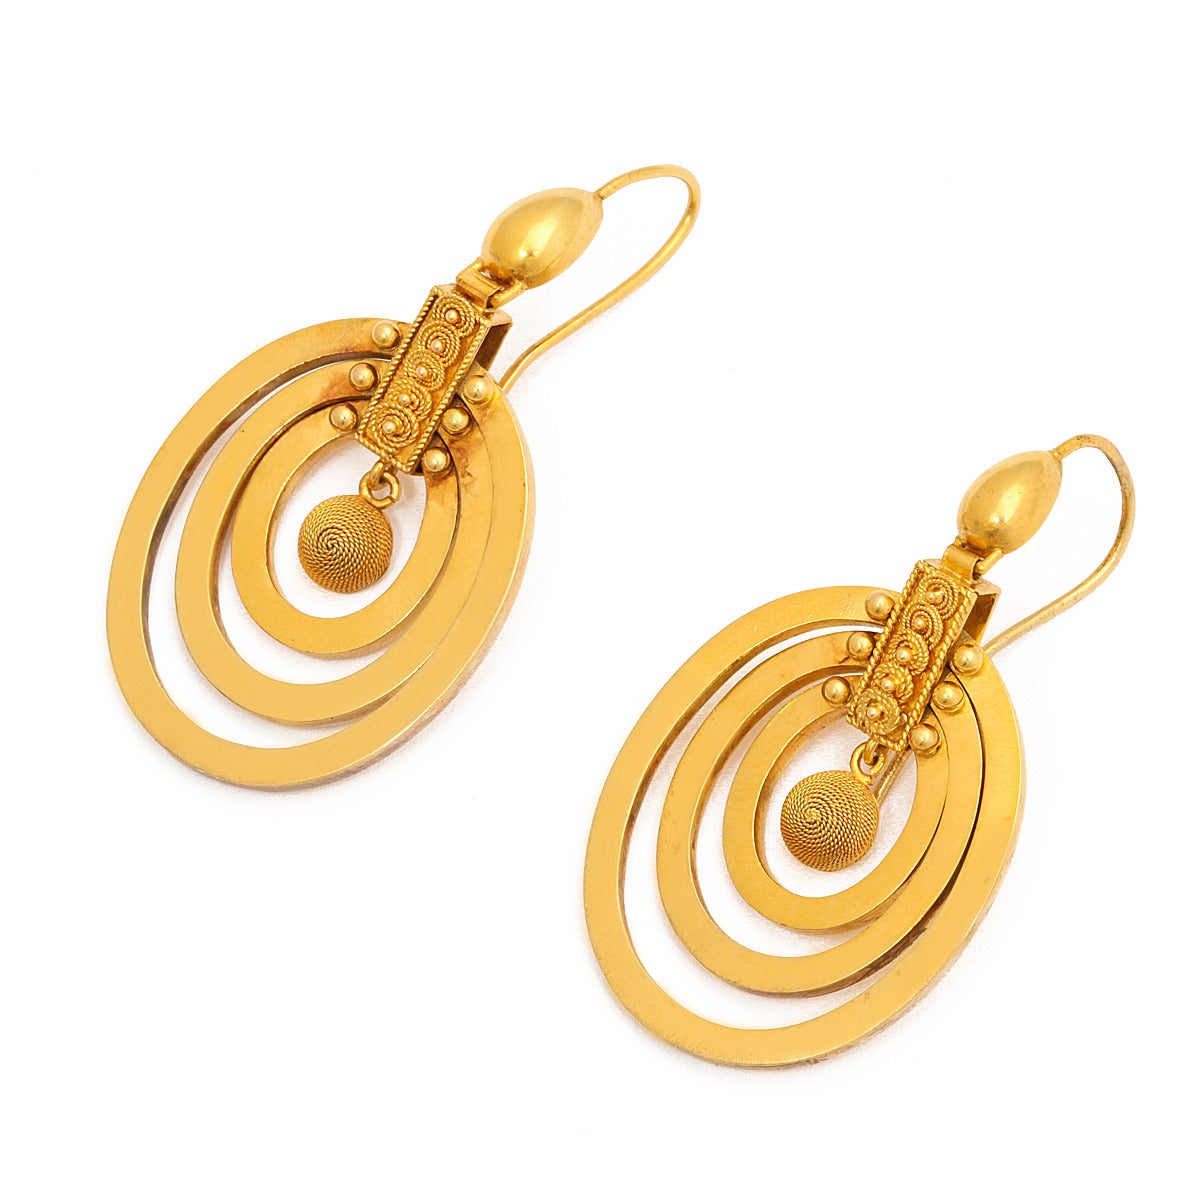 Victorian Roman Revival gold earrings composed of articulated triple hoops, with granulation. 

English, ca. 1885
Length: 2 inches